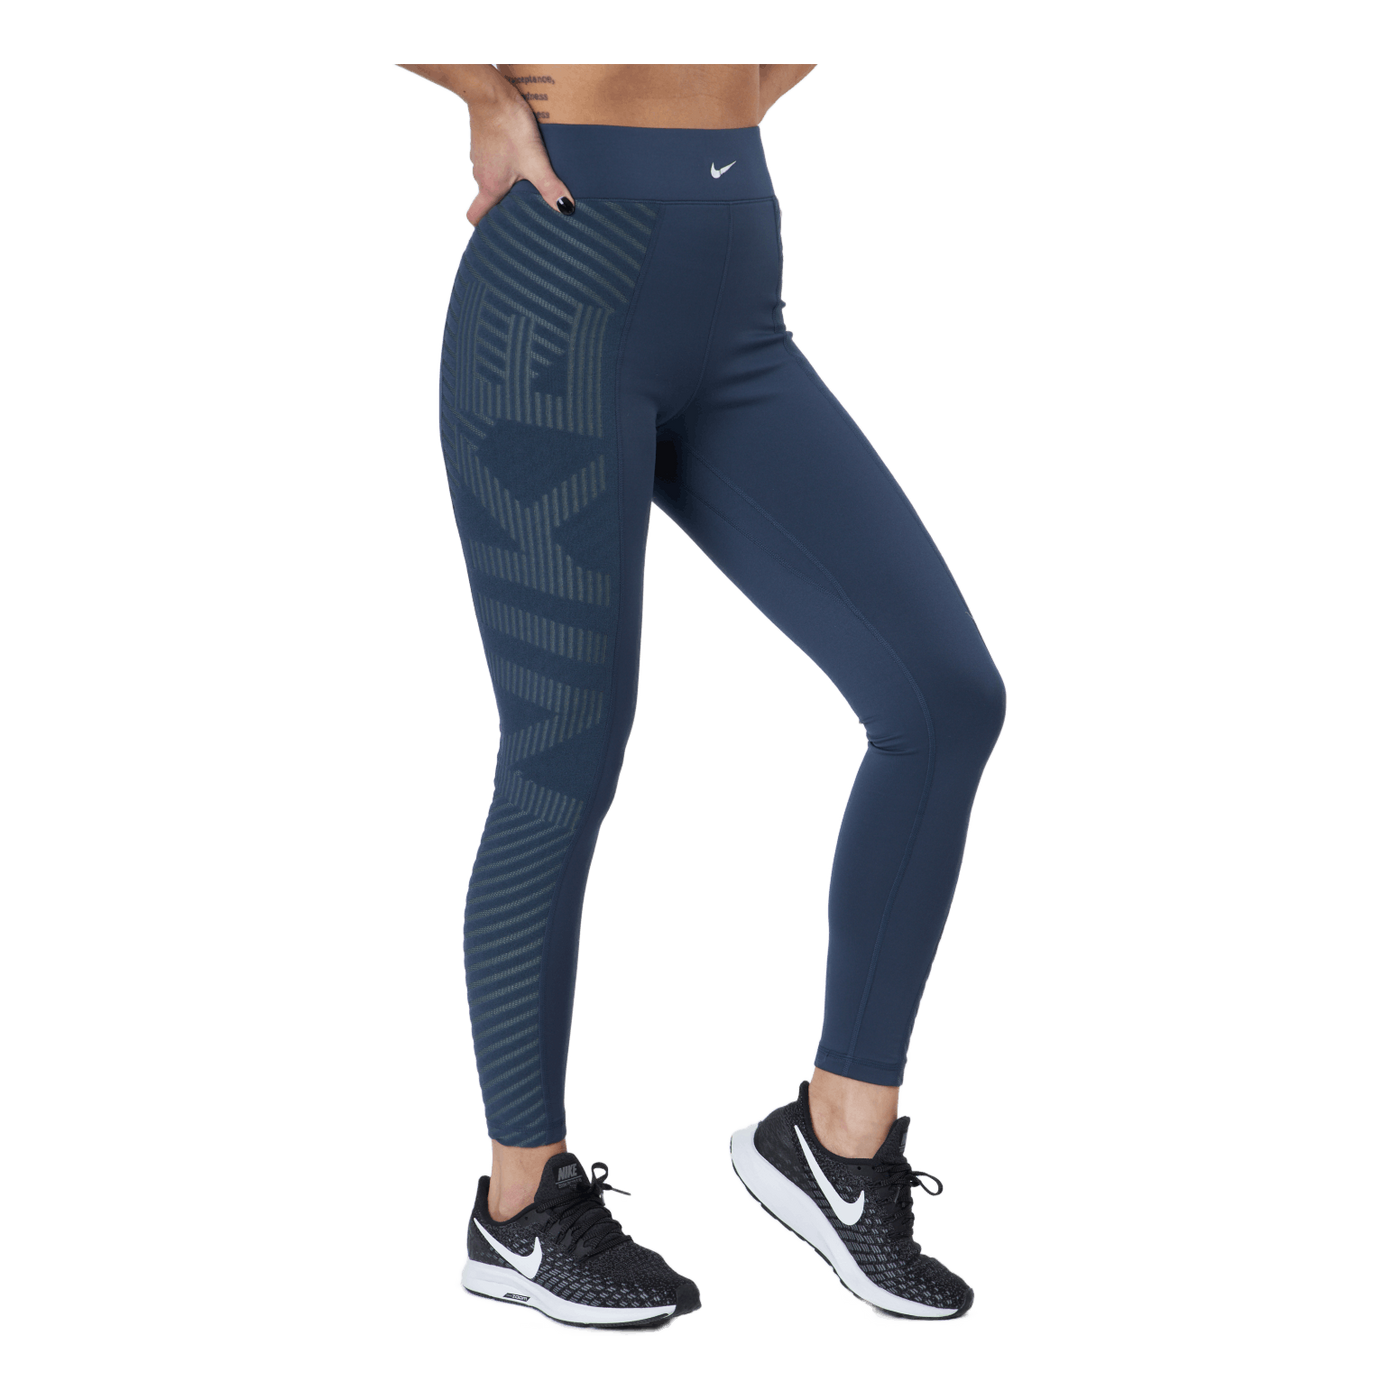 Pro Therma-fit Adv Women's Hig Thunder Blue/metallic Silver